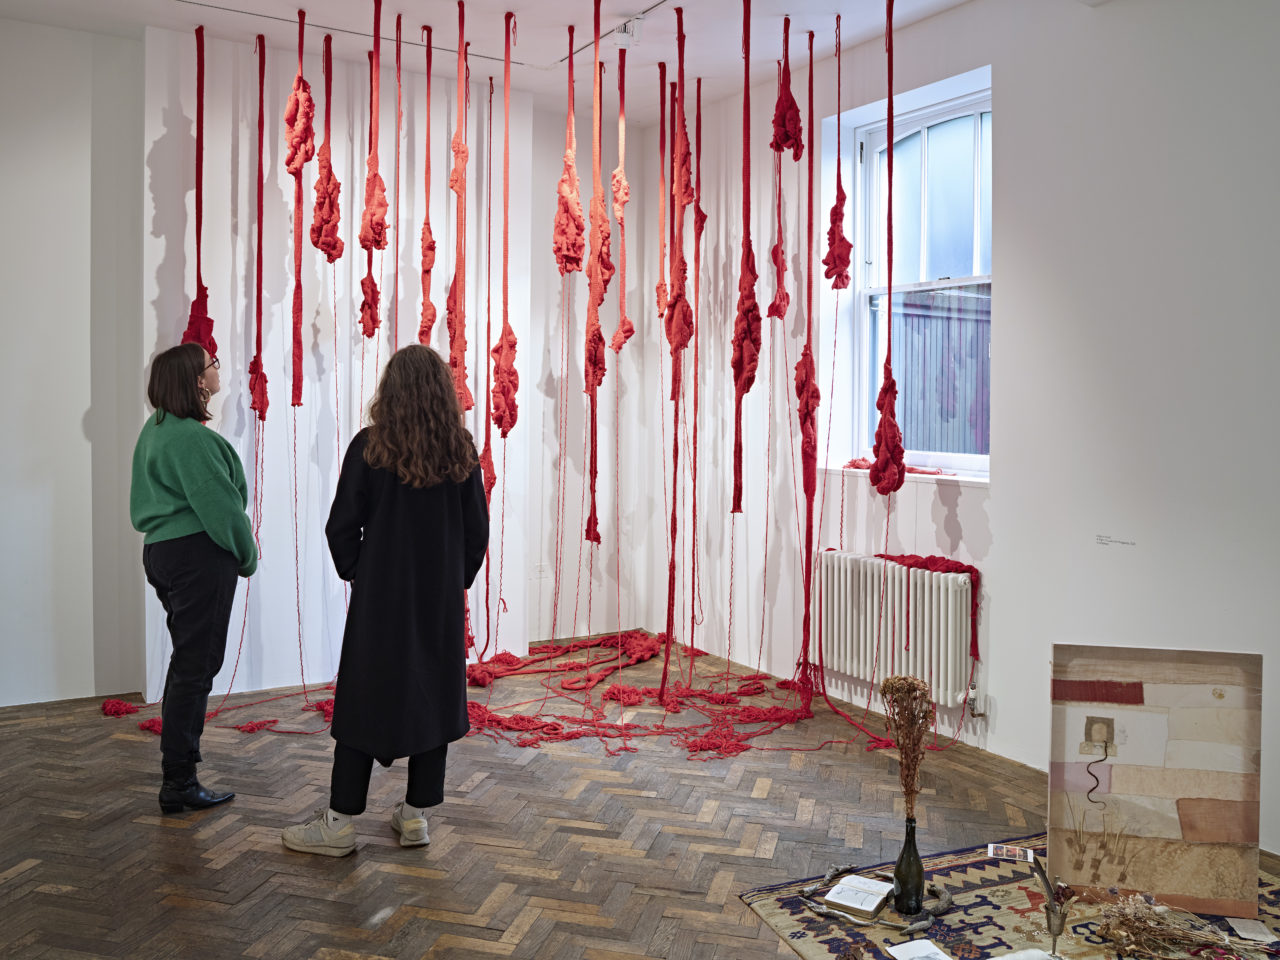 Two people standing in a gallery. They are looking at an installation artwork made from hanging red wool.